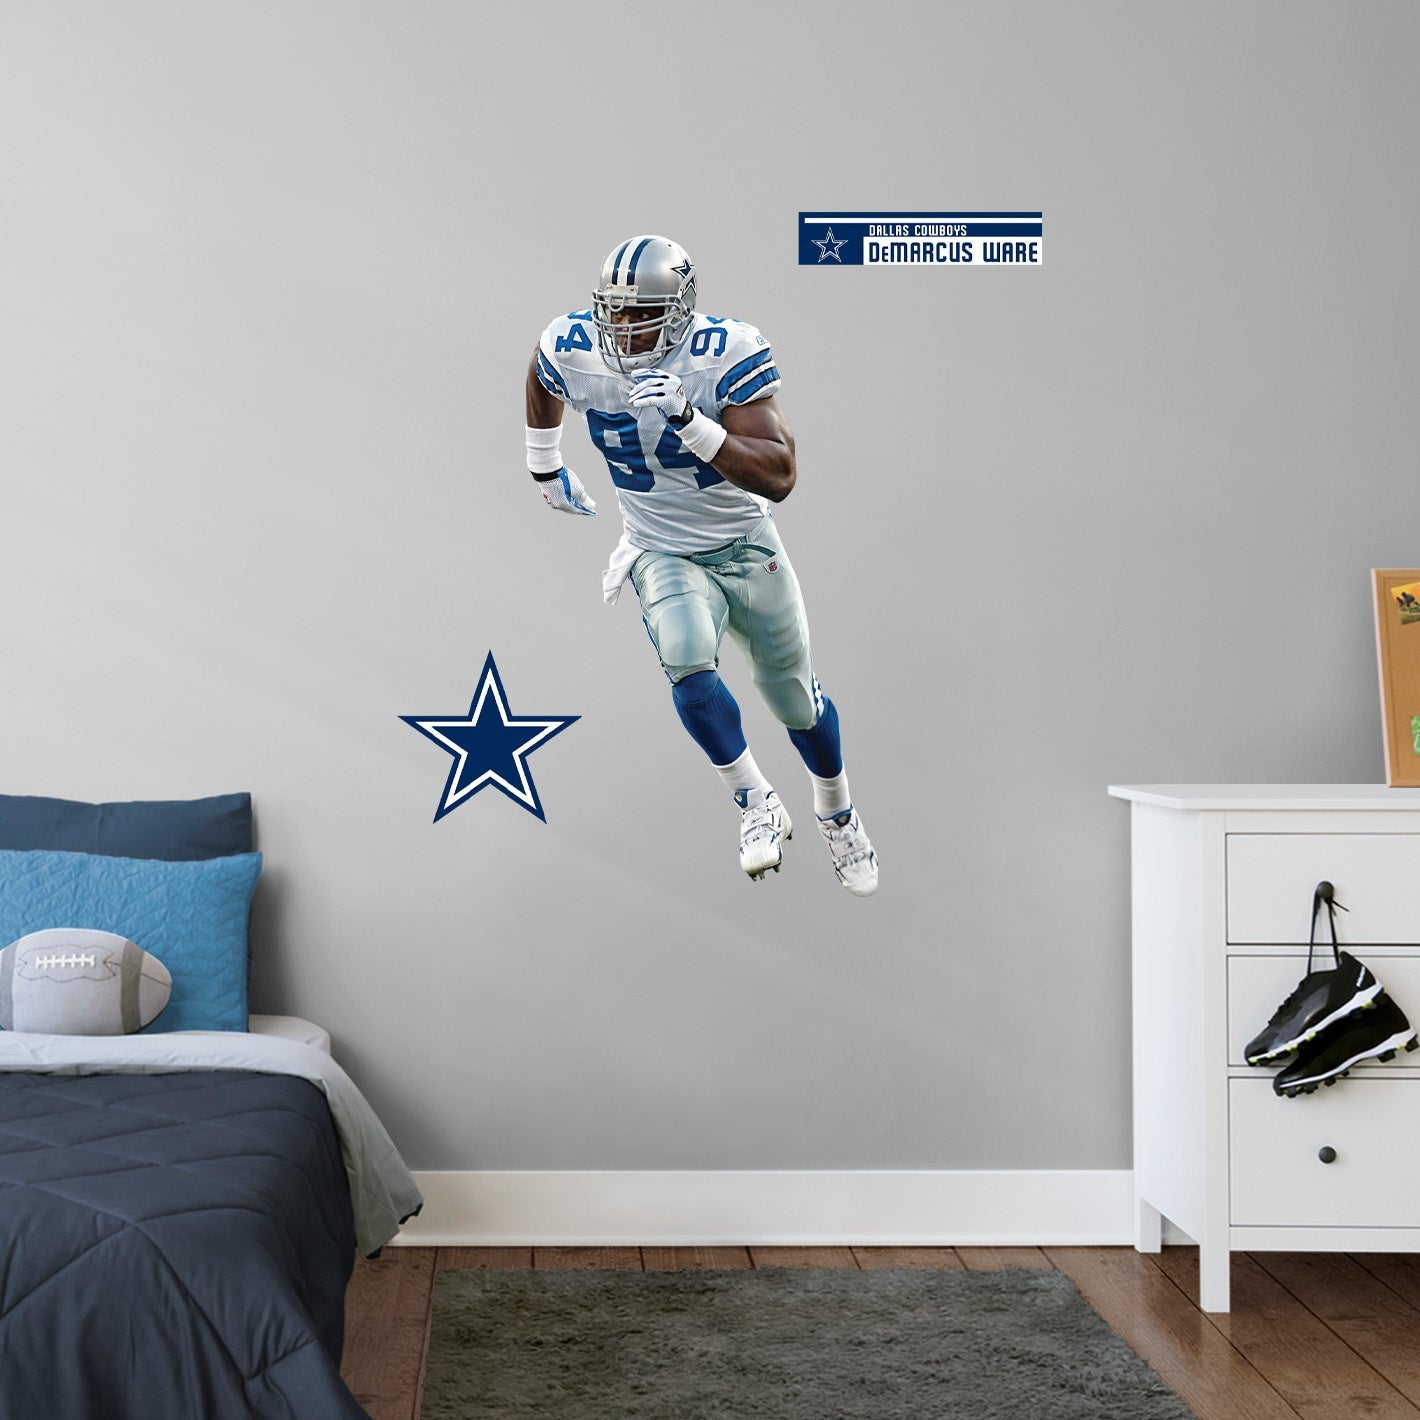 Dallas Cowboys: DeMarcus Ware Legend - Officially Licensed NFL Removable Adhesive Decal